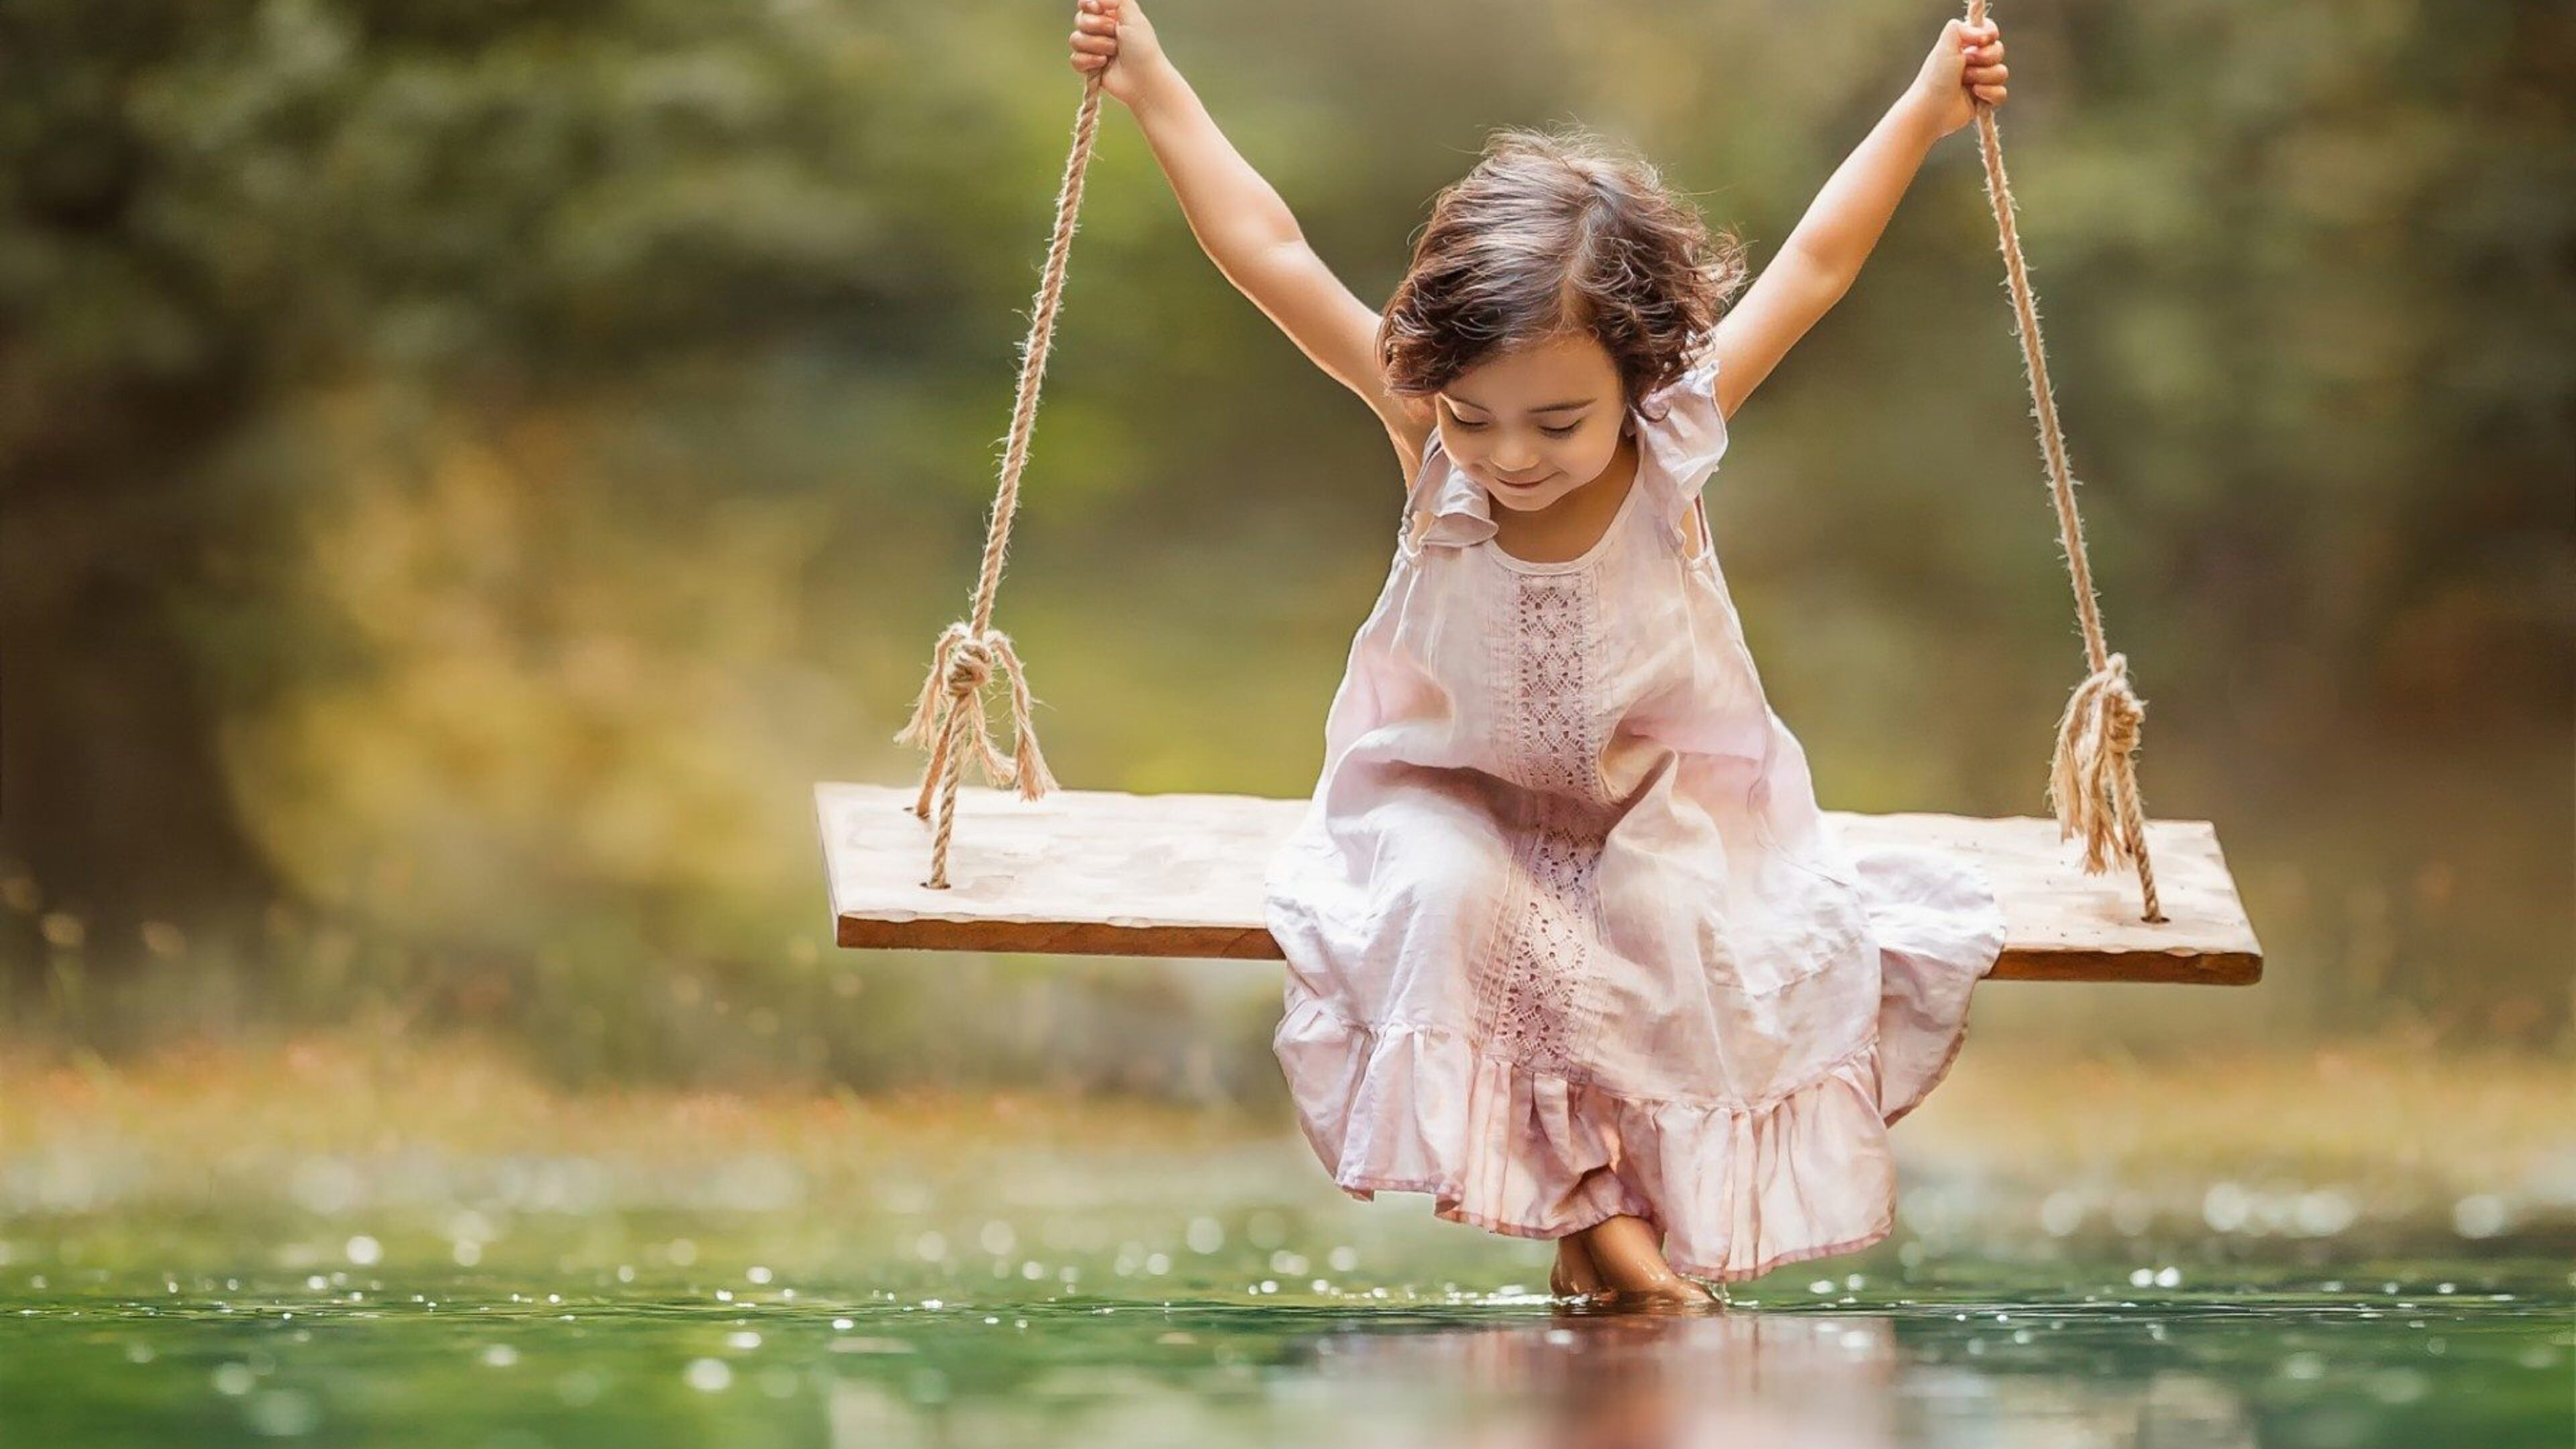 Cute Little Girl Is Wearing Light Peach Dress Riding On Swing Over River During Daytime K 2K Cute